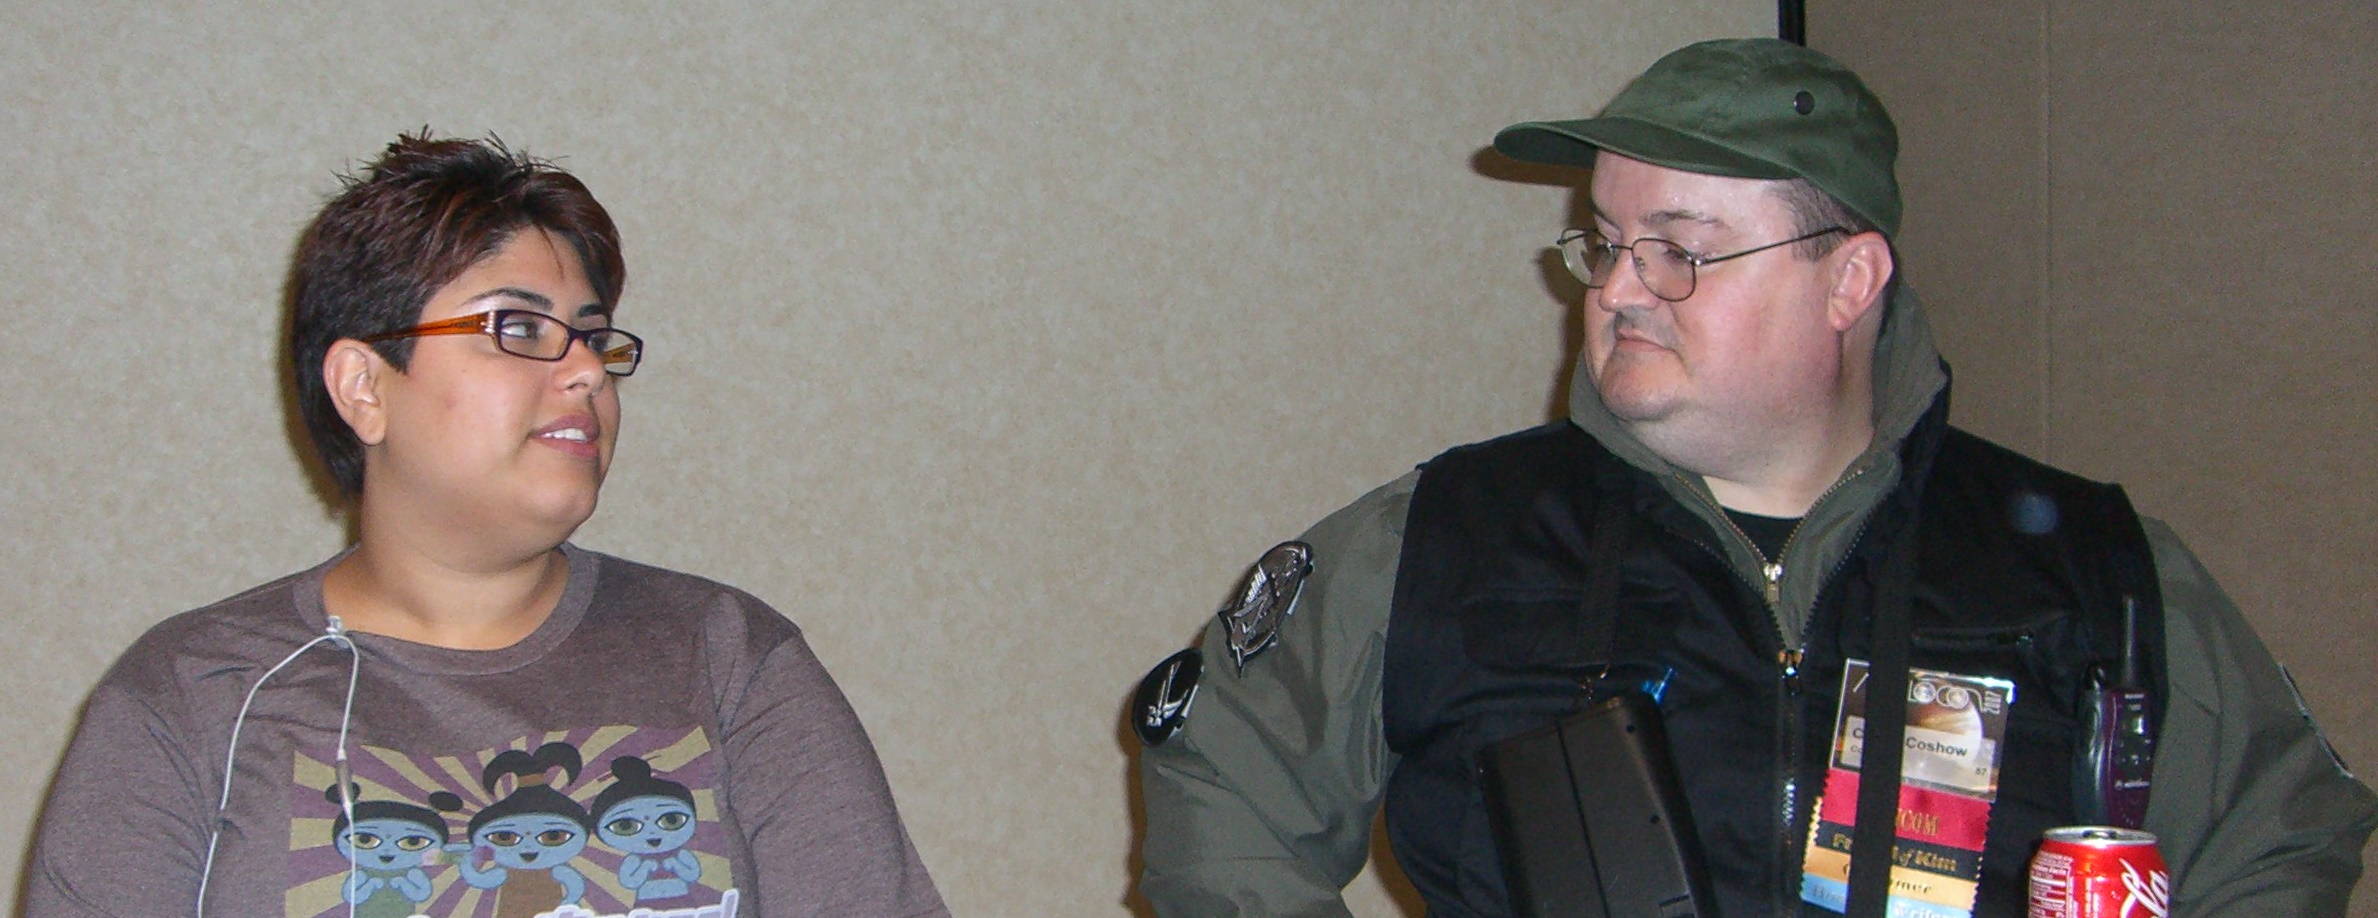 VV (left) and CC on the Finding Love in Fandom panel at ApolloCon 2007